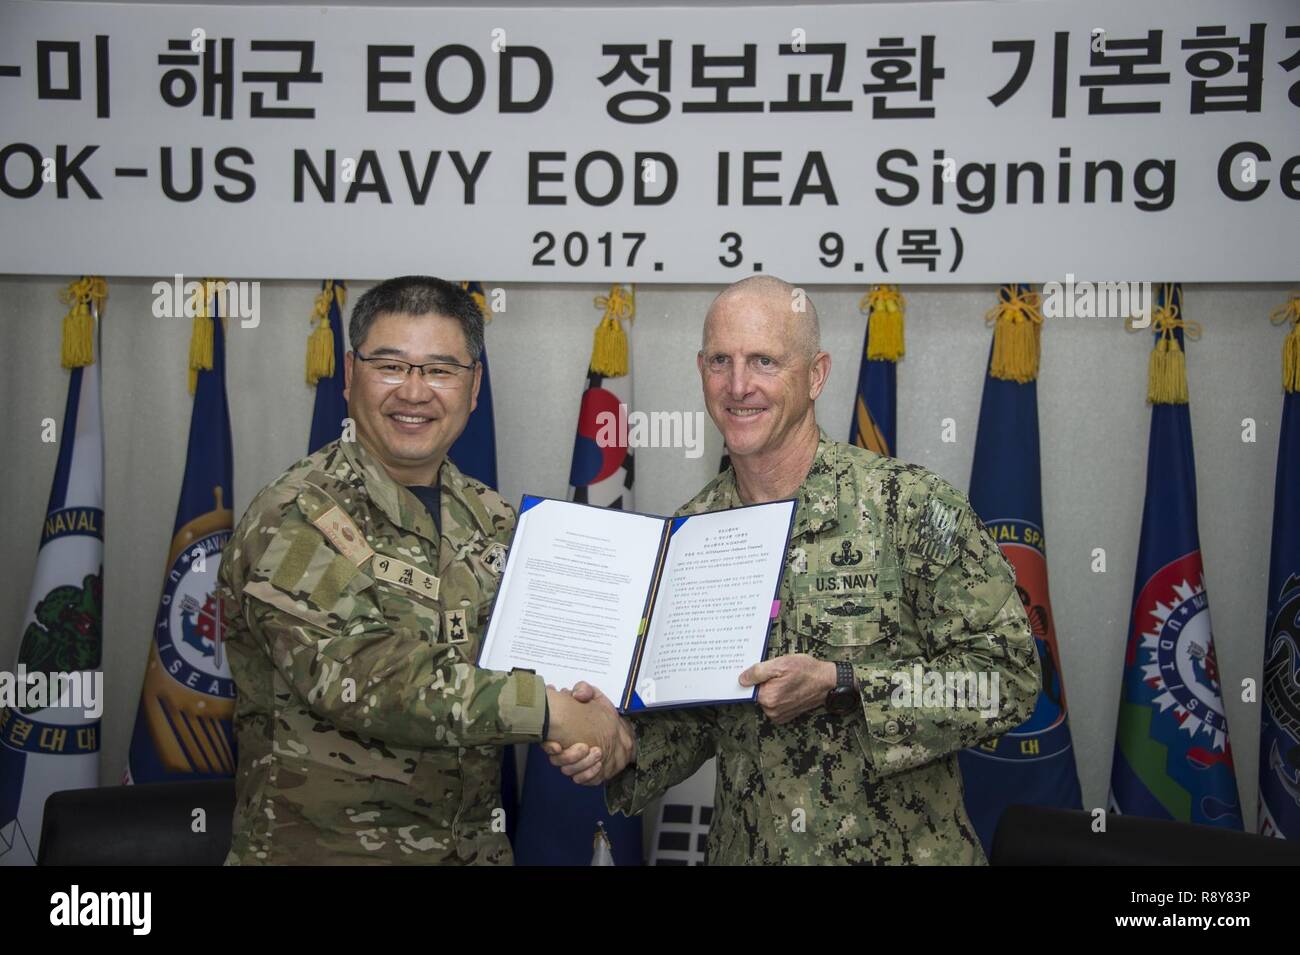 Commander, Republic of Korea (ROK) Naval Special Warfare Flotilla, Rear Adm. Jae Eun Lee, and Commander, Task Force 75, U.S. Navy Capt. Robert A. Baughman, shake hands after signing an information exchange agreement in Jinhae, ROK, March 9, 2017, as part of exercise Foal Eagle 2017. The agreement addresses research and development practices between the two nations, promotes explosive ordnance disposal interoperability, and enhances future readiness. Stock Photo